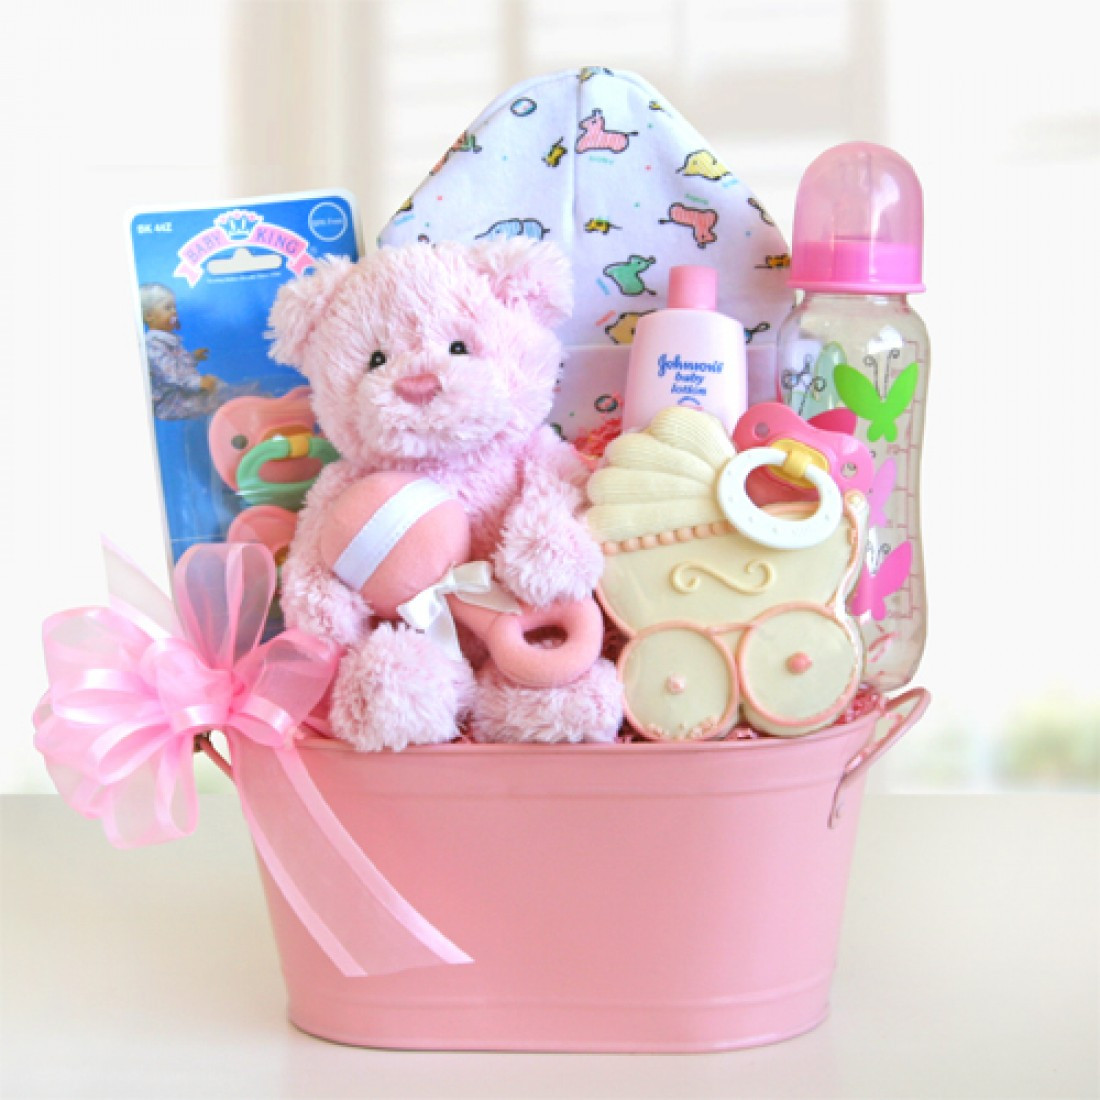 New Baby Girl Gift
 Cute Package New Baby Gift Baskets